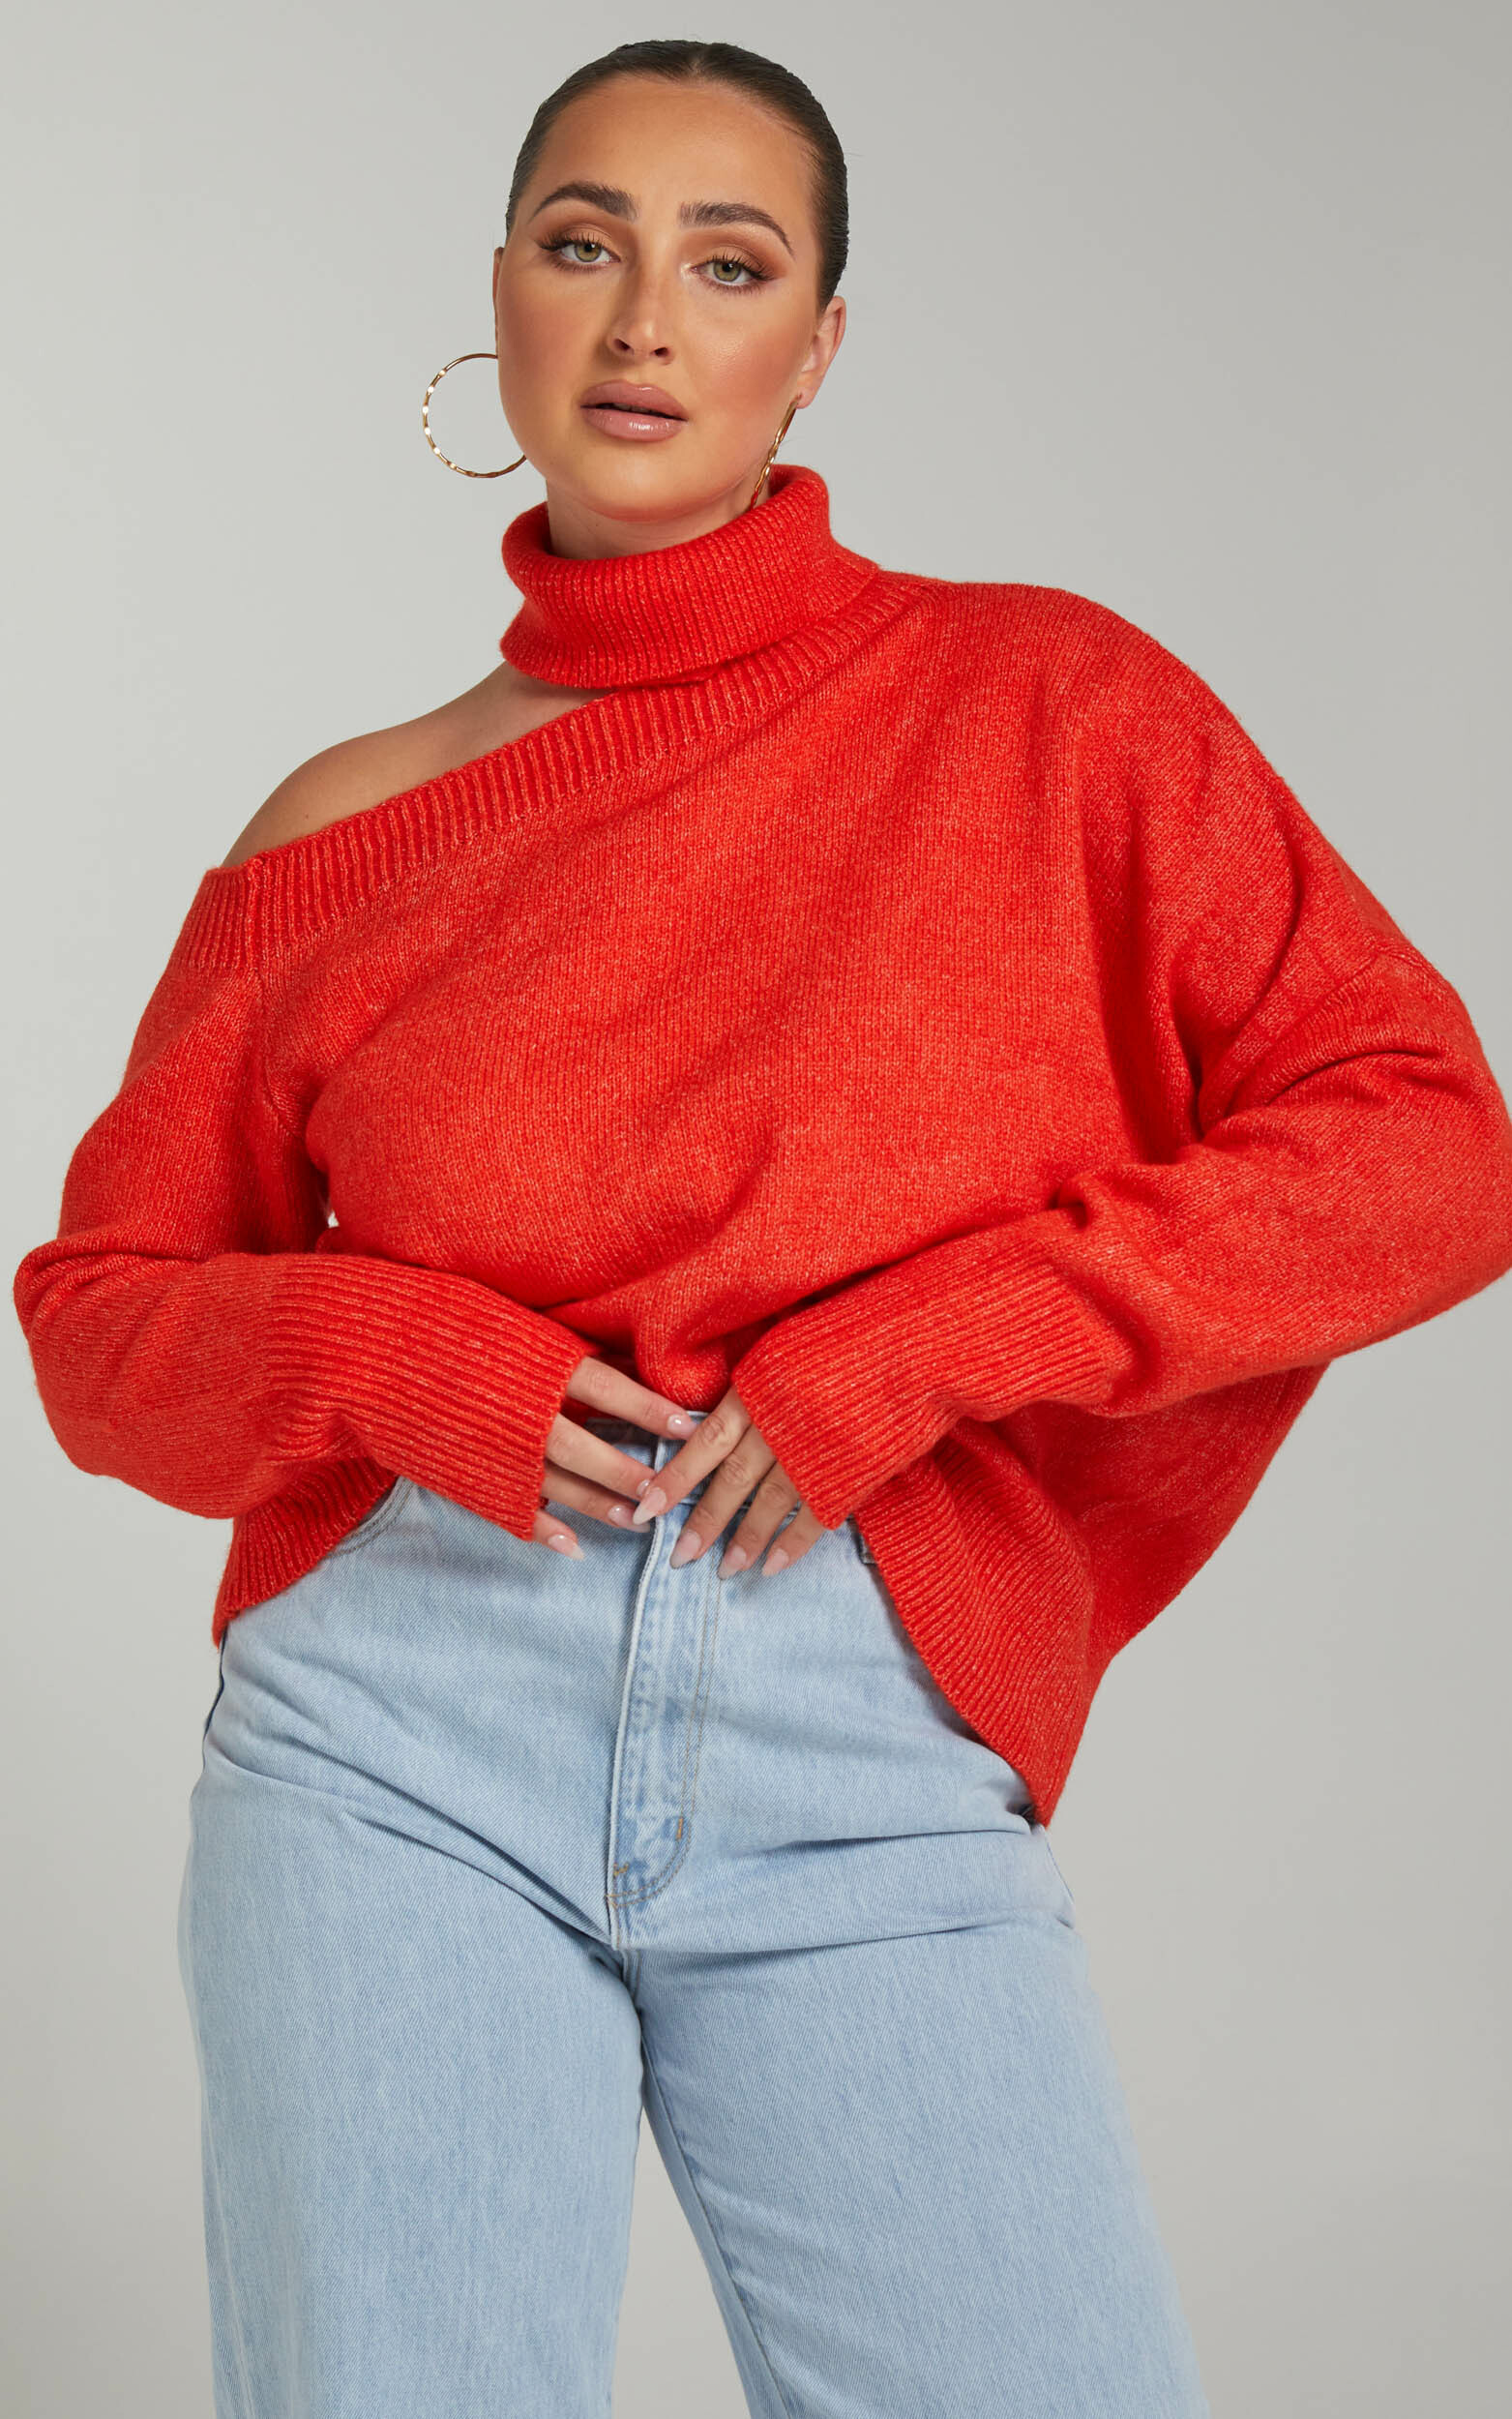 Ceila Knit Top with Shoulder Cut Out in Orange - 06, ORG2, hi-res image number null